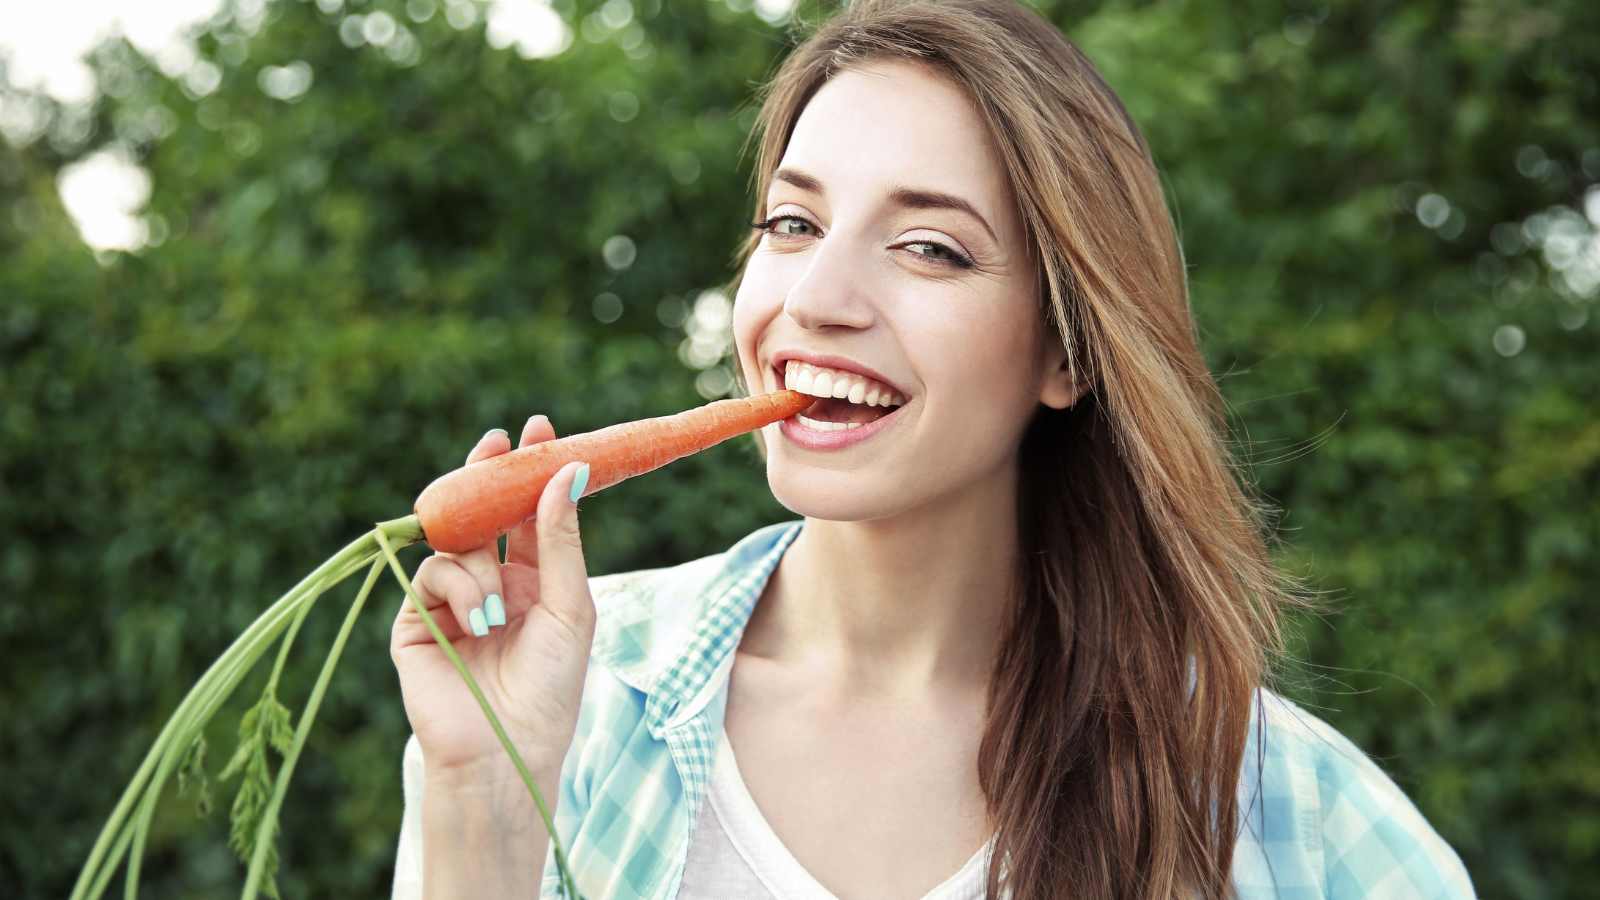 woman eating carrot outdoor